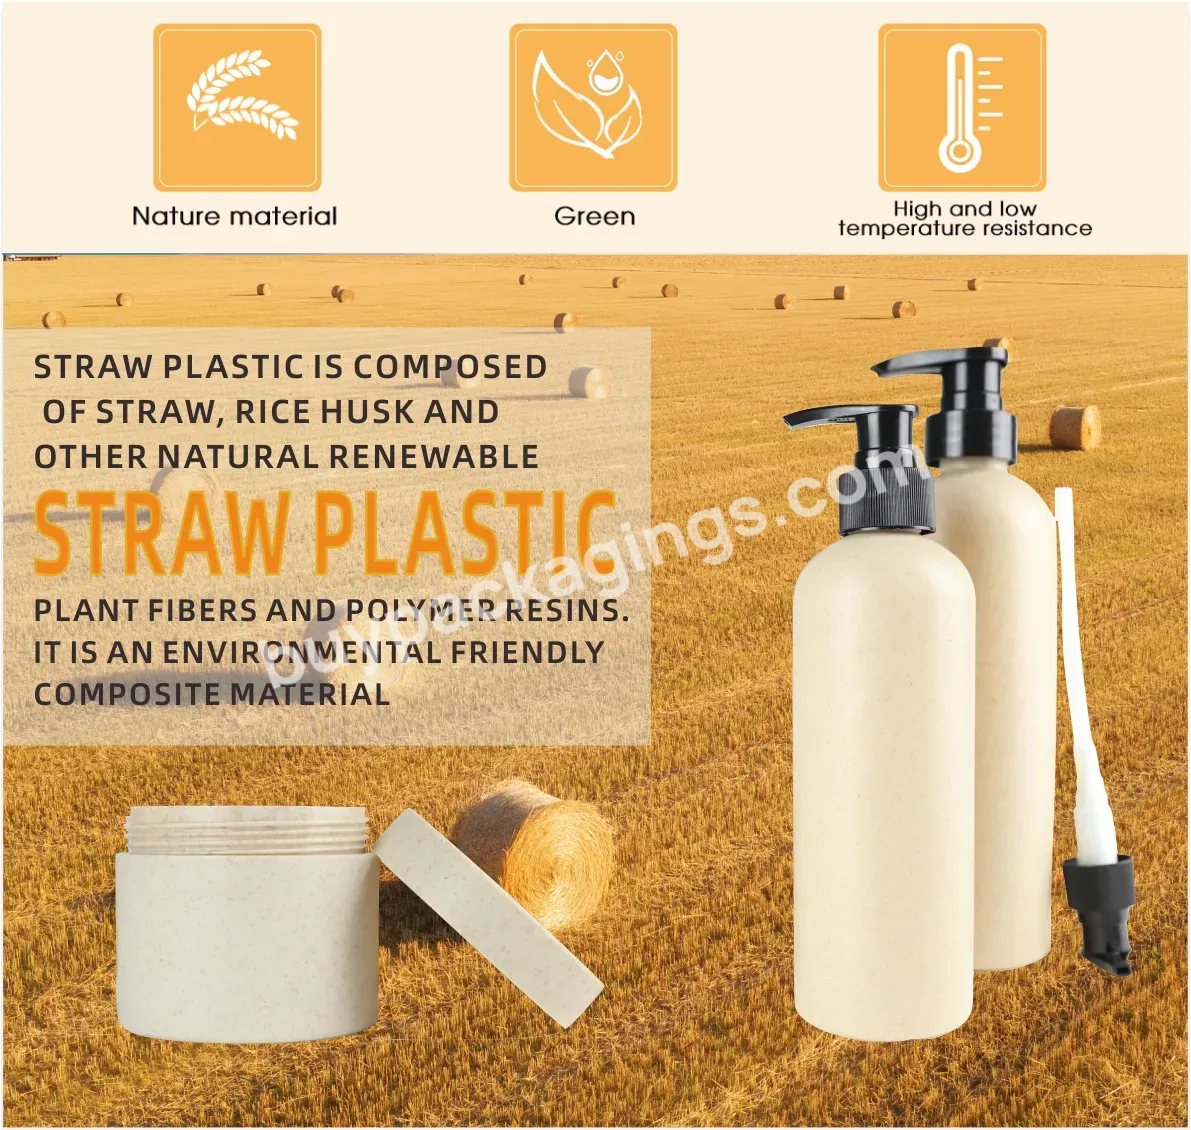 Unique Personal Care Cream Plastic Square Bottles Containers Biodegradable Compostable Refill Wheat Straw Plastic Shampoo Bottle - Buy Plastic Bottles Biodegradable Compostable,Shampoo Bottle,Wheat Straw Bottle.